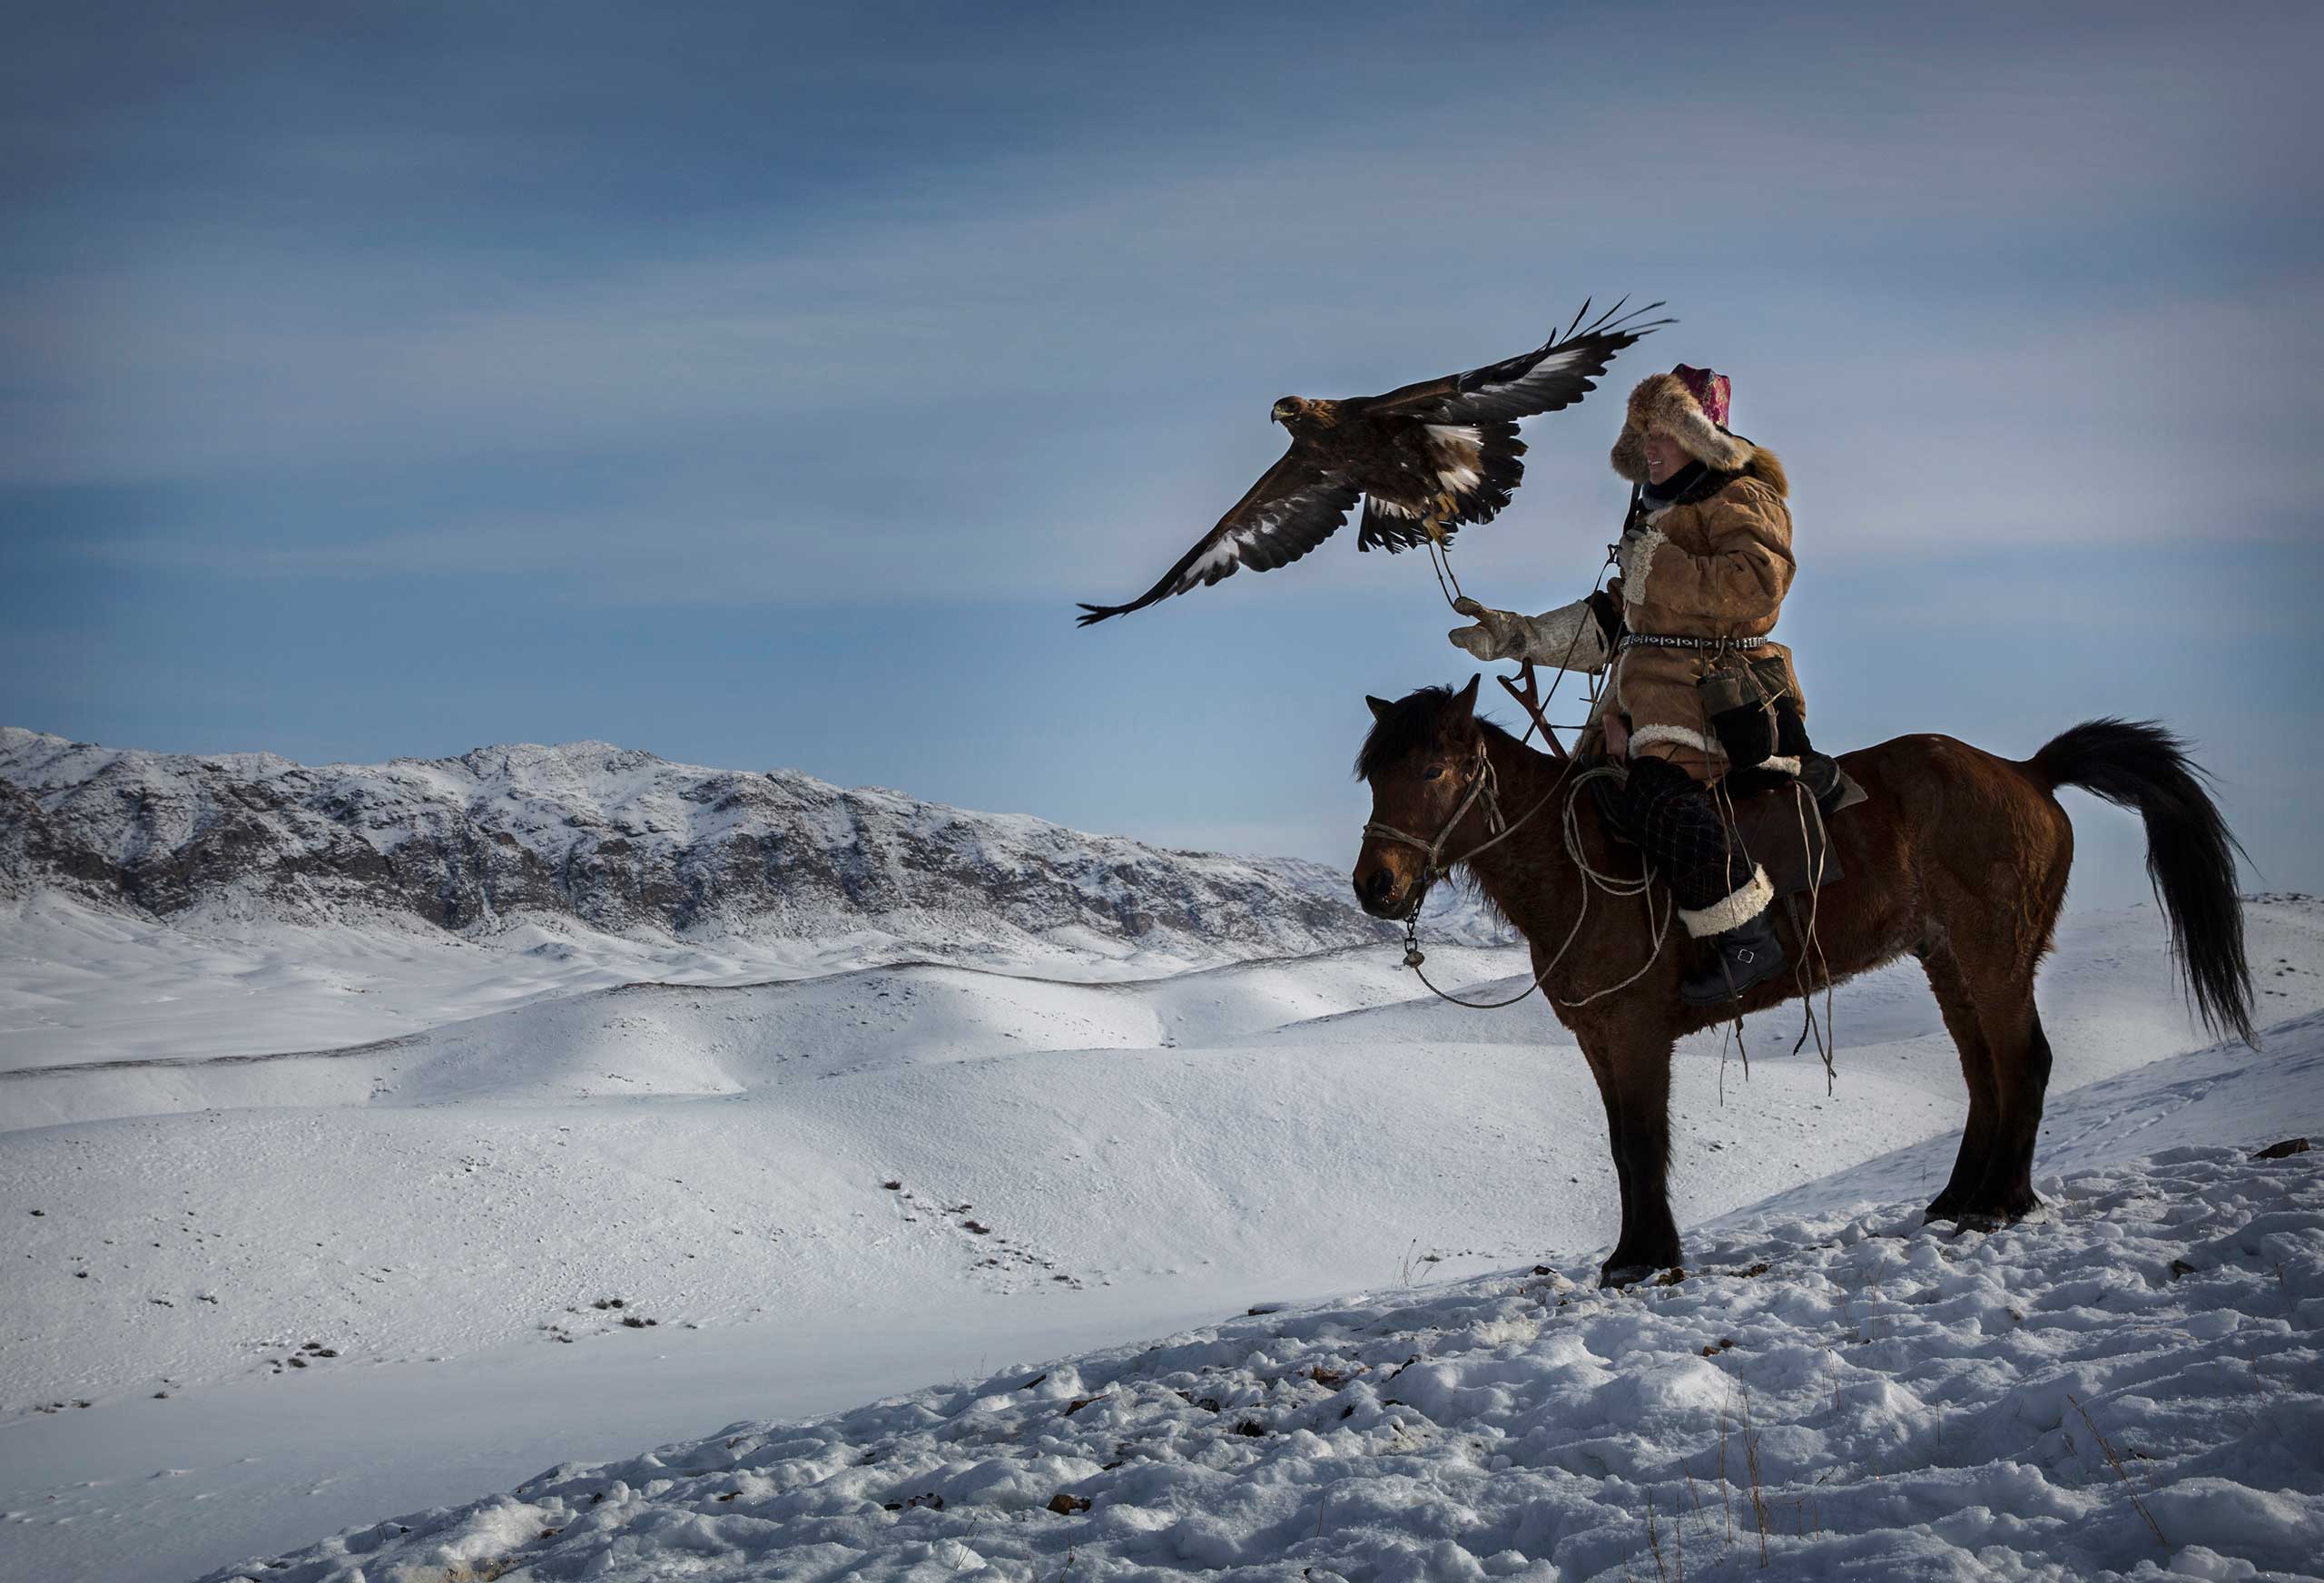 A Chinese Kazakh eagle hunter releases his eagle during a local competition  in the mountains of Qinghe County, Xinjiang, northwestern China, Jan. 31, 2015.